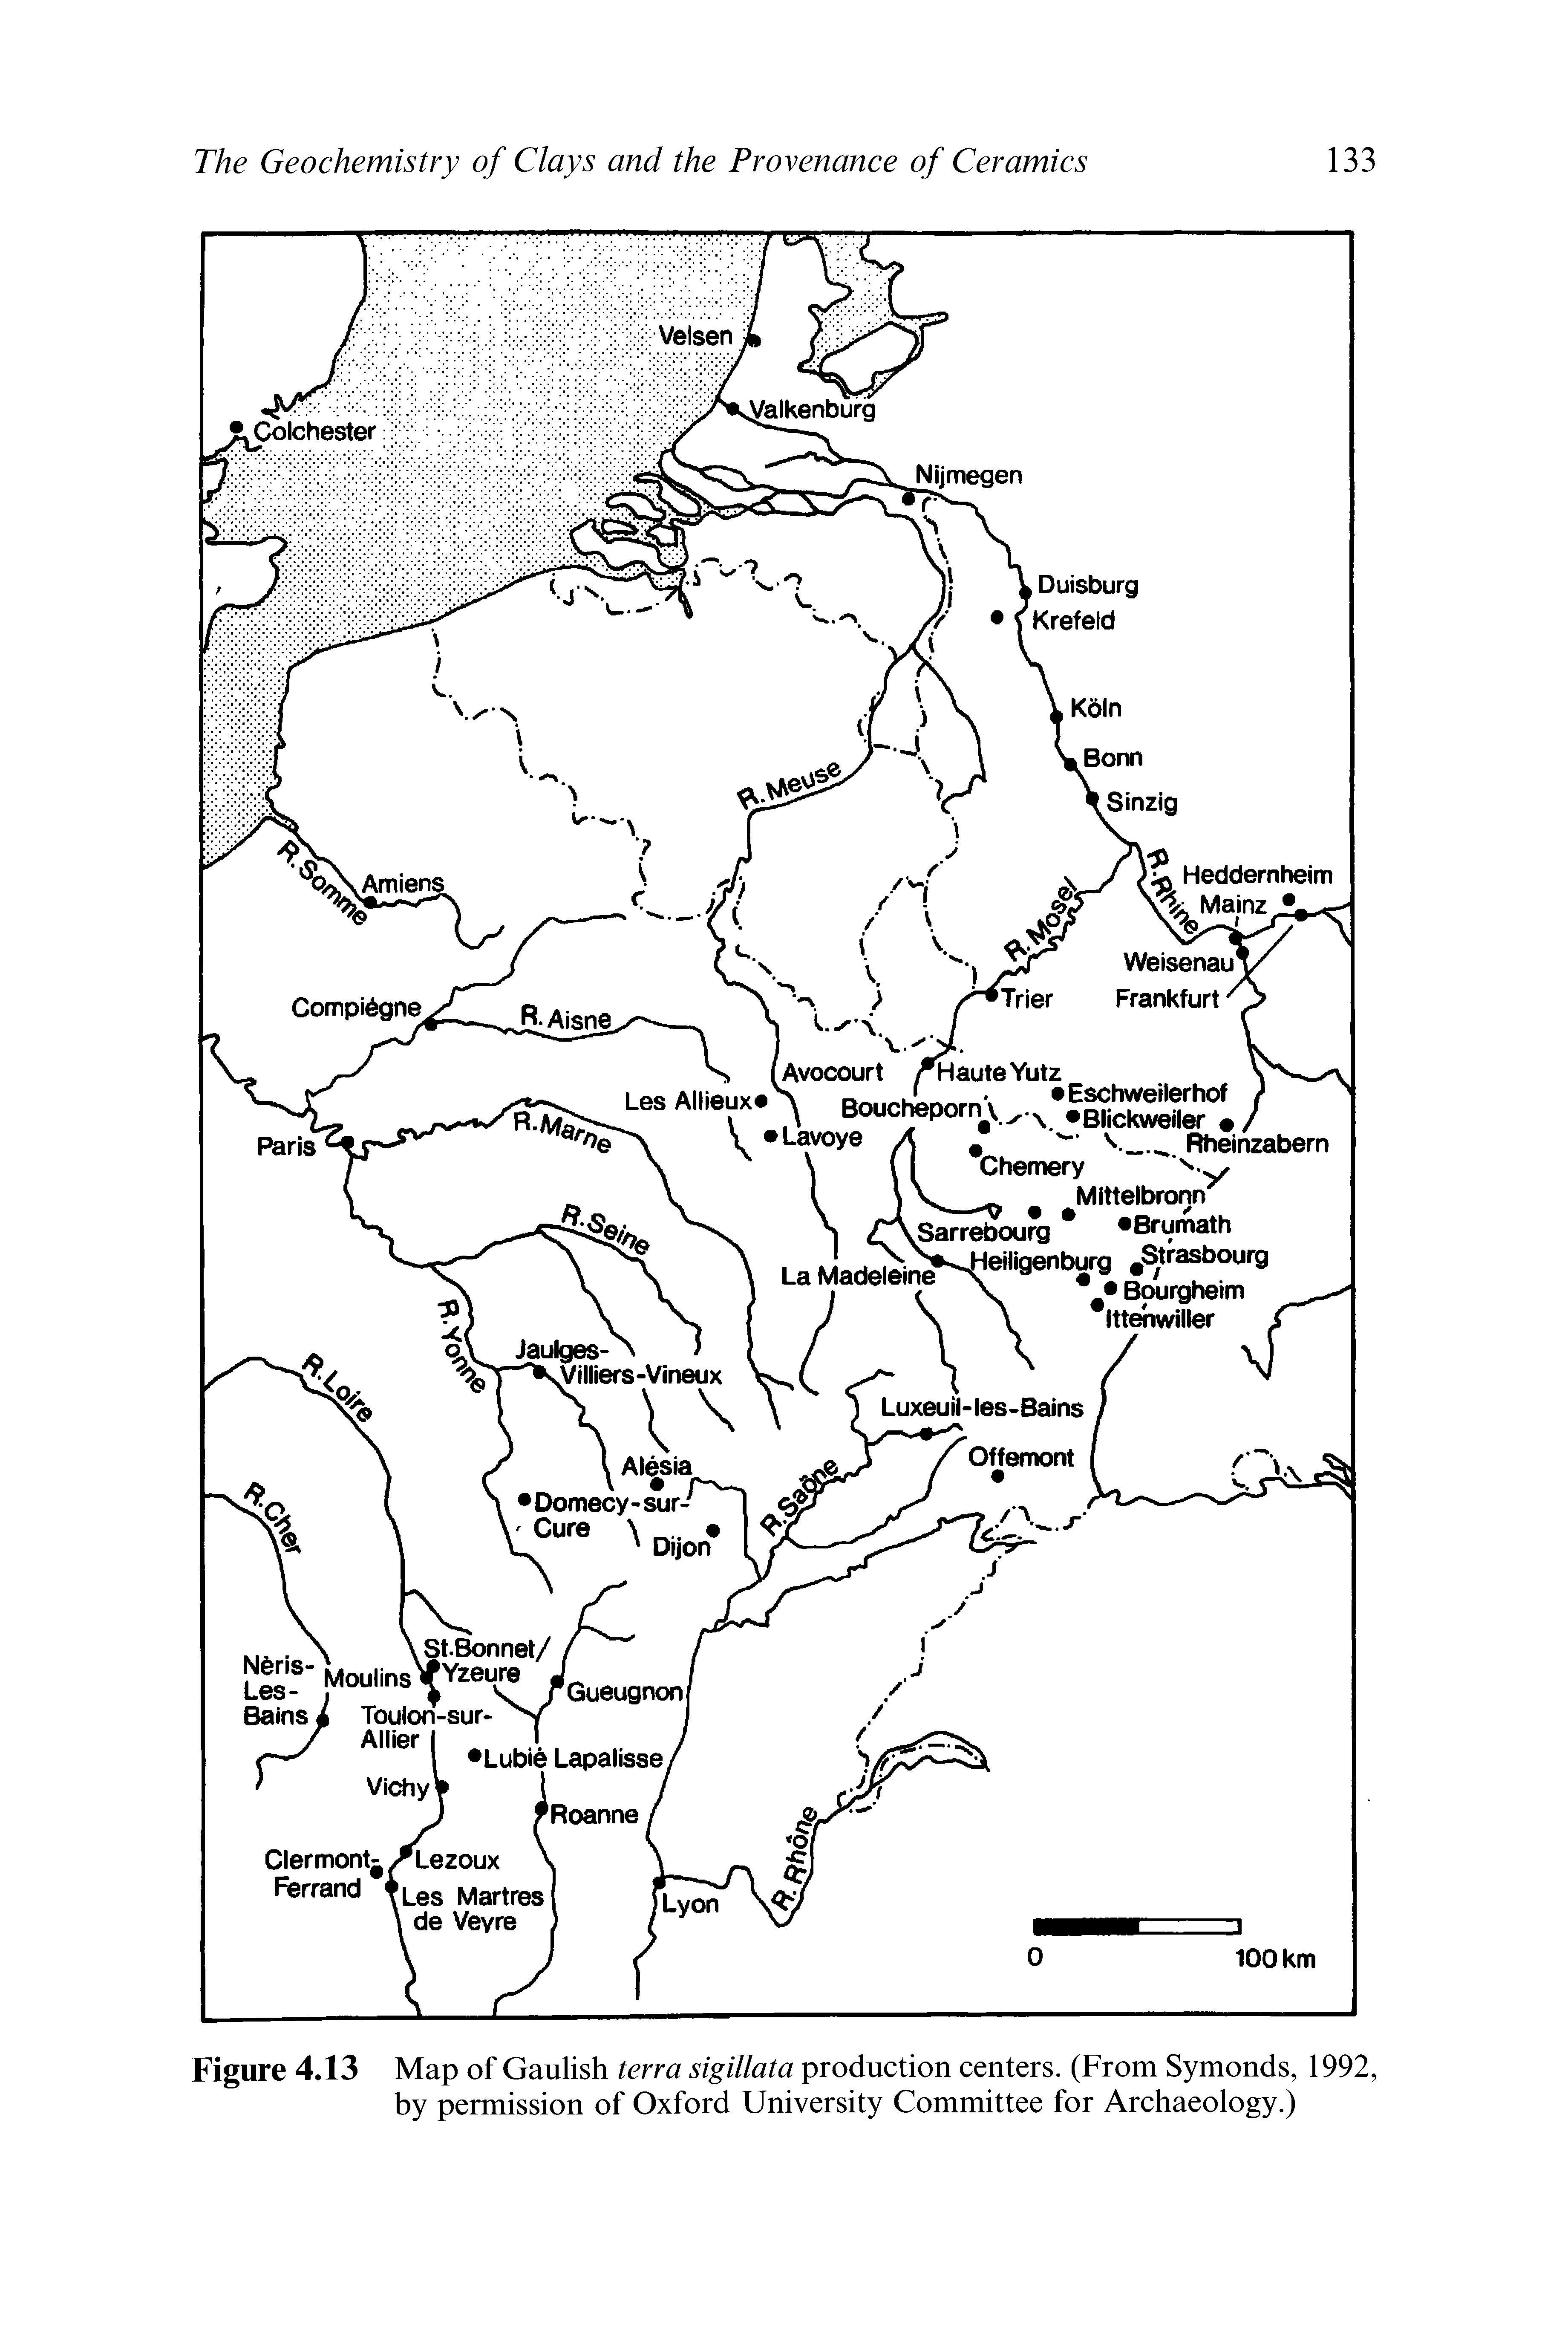 Figure 4.13 Map of Gaulish terra sigillata production centers. (From Symonds, 1992, by permission of Oxford University Committee for Archaeology.)...